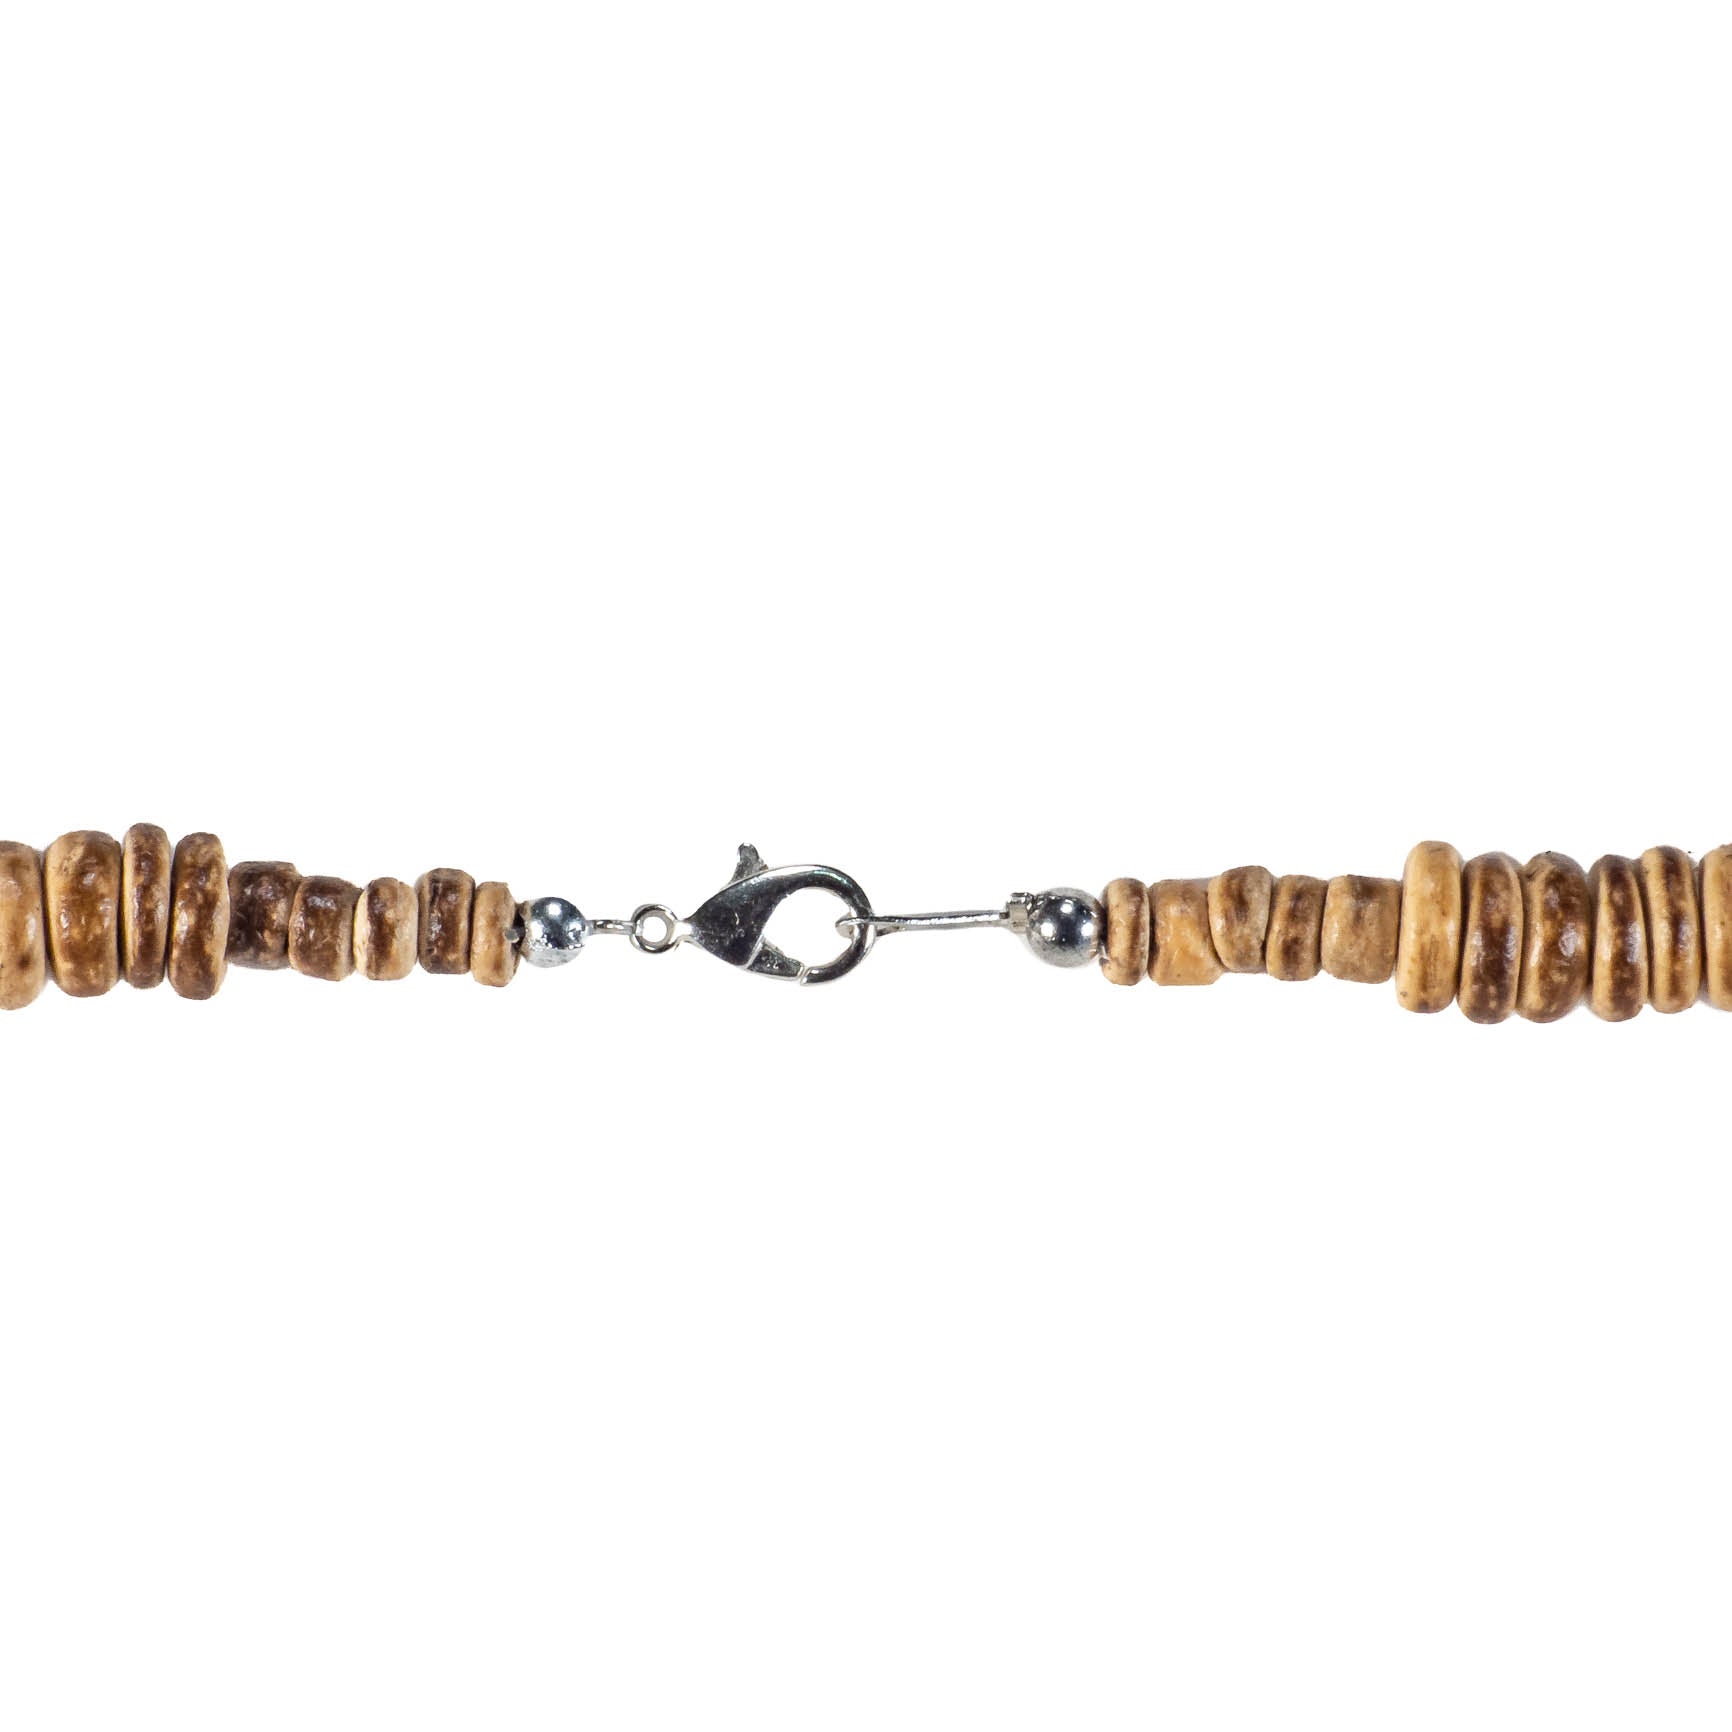 Tiger Brown & Brown Coconut Beads and Puka Shell Beads Necklace & Bracelet Set